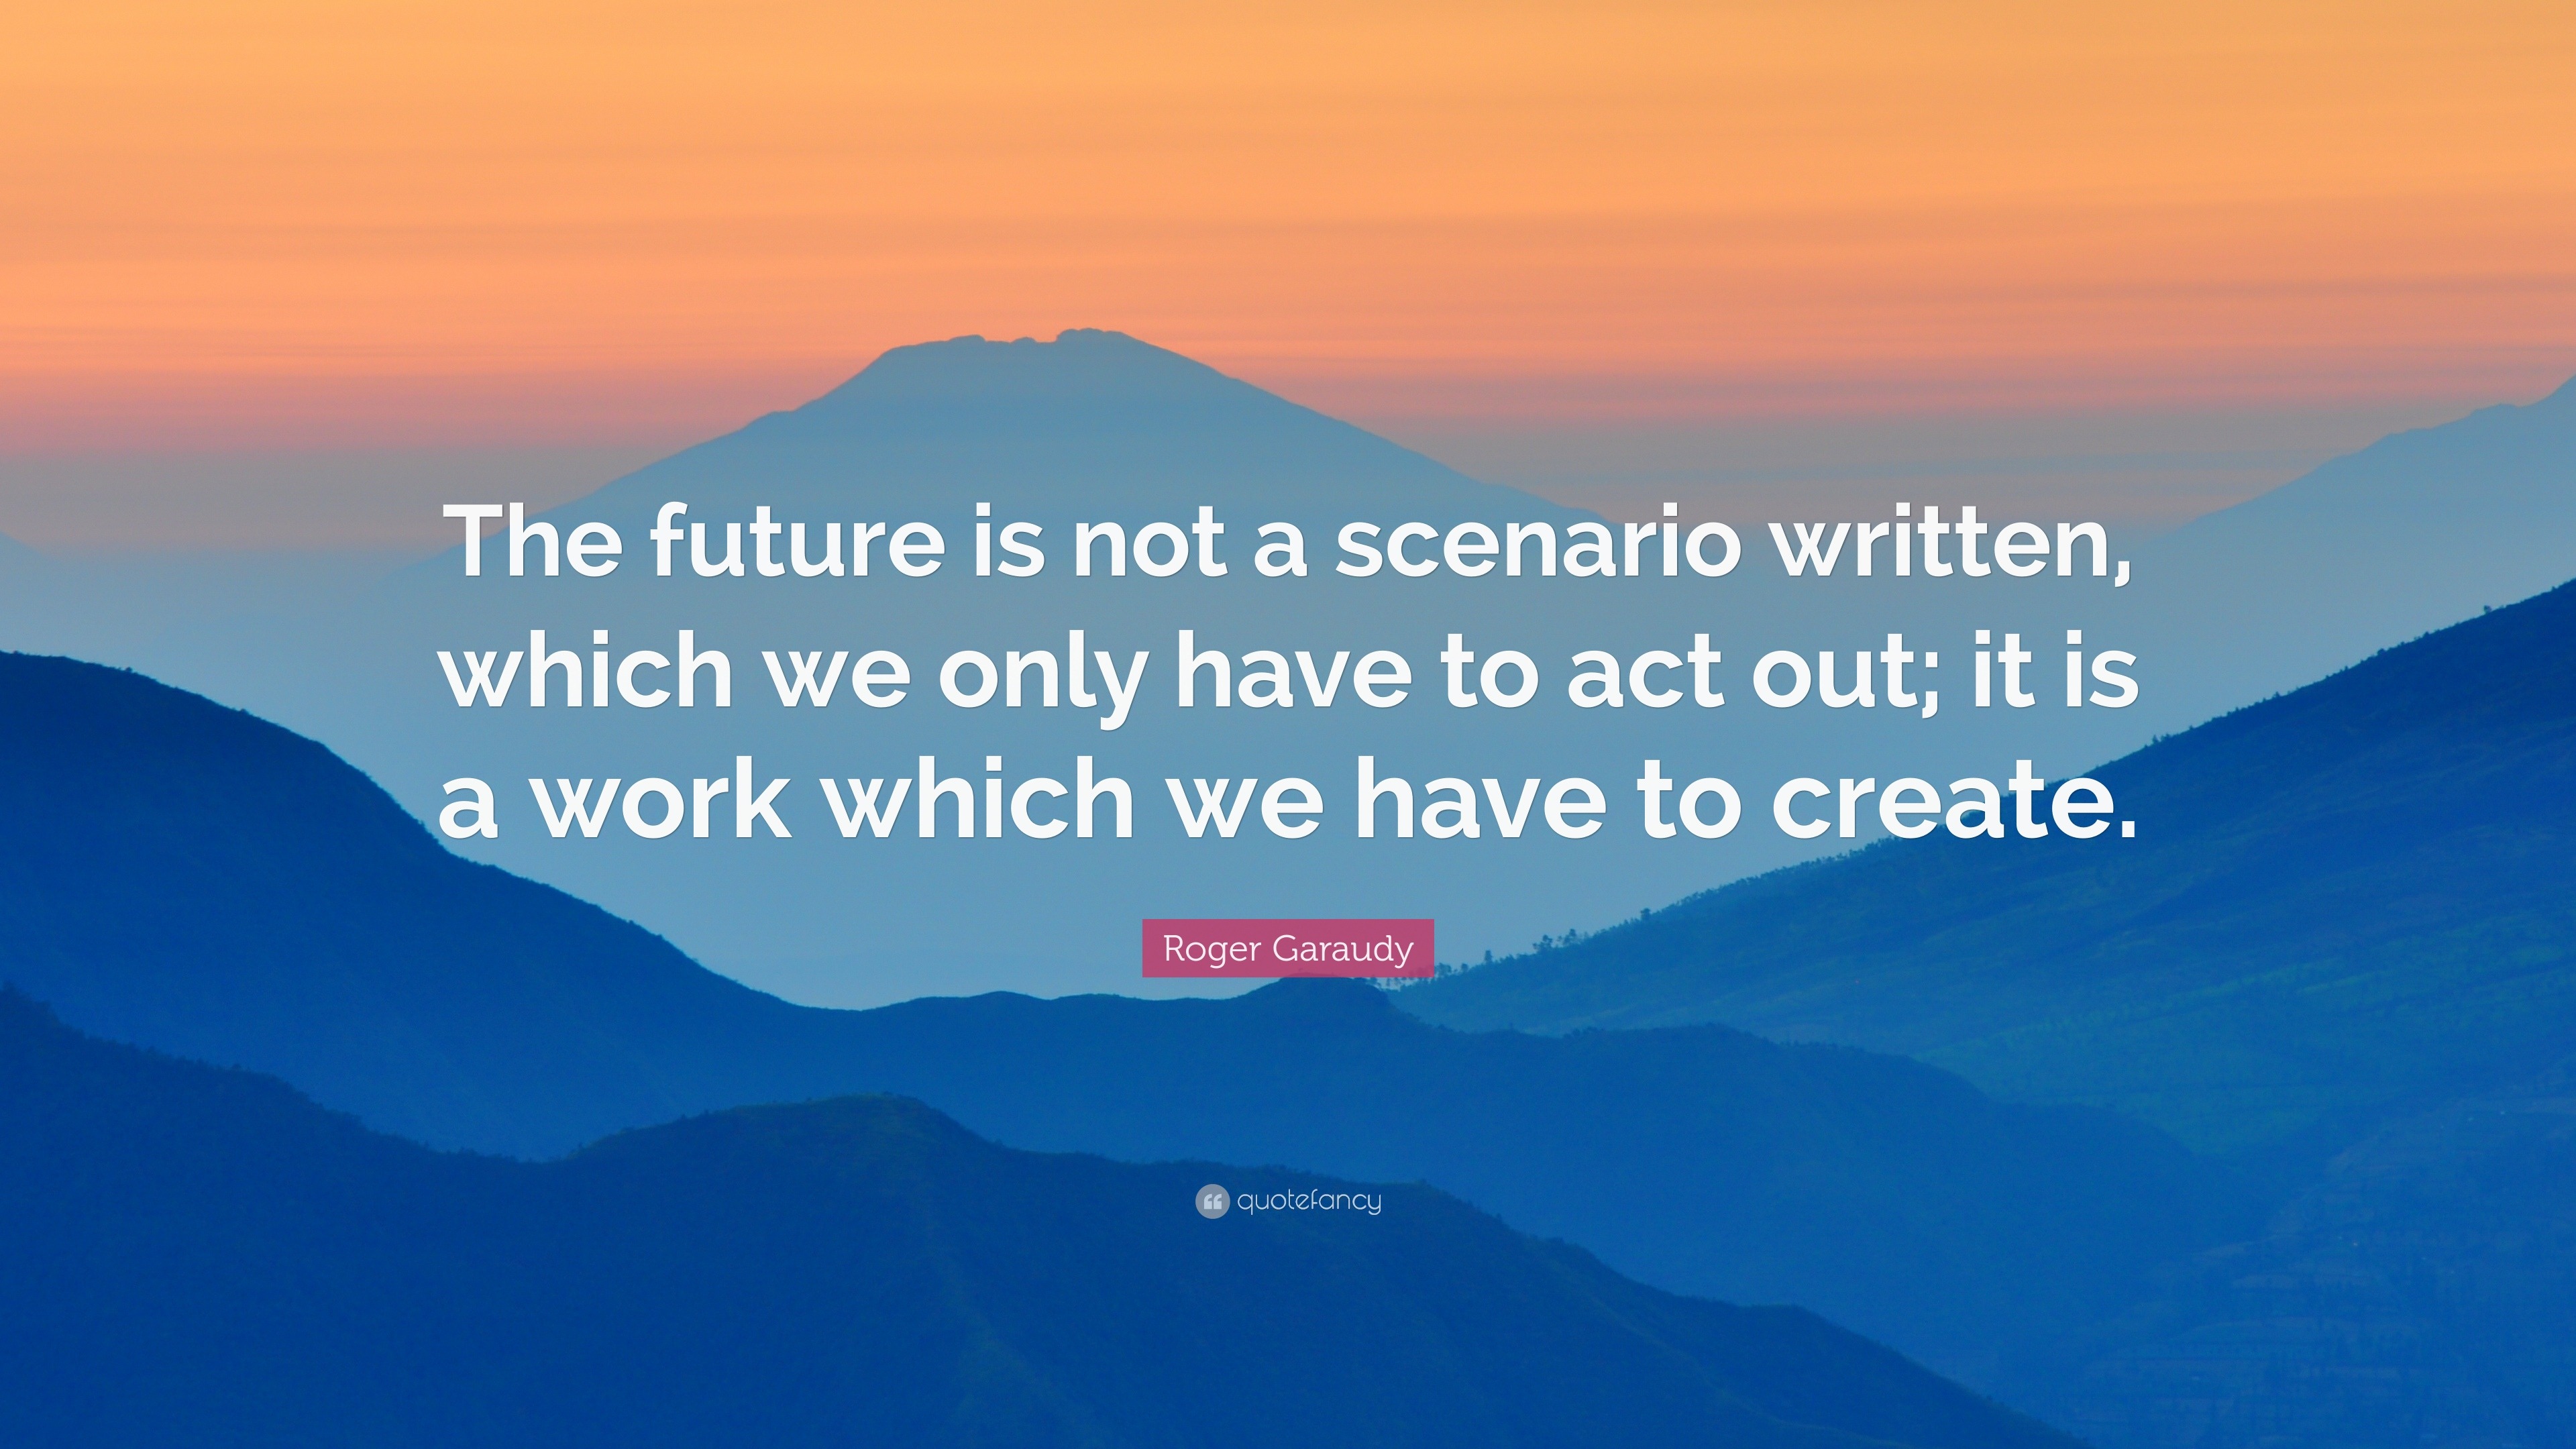 Roger Garaudy Quote: “The future is not a scenario written, which we